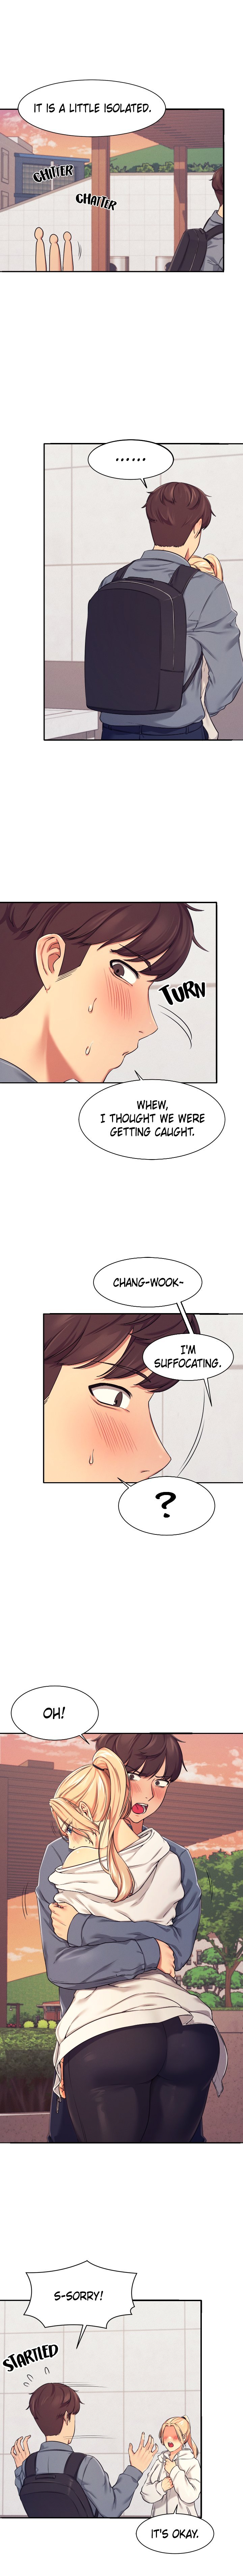 [OB, Overtime Sloth] Is There No Goddess in My College? Ch.10/? [English] [Manhwa PDF]